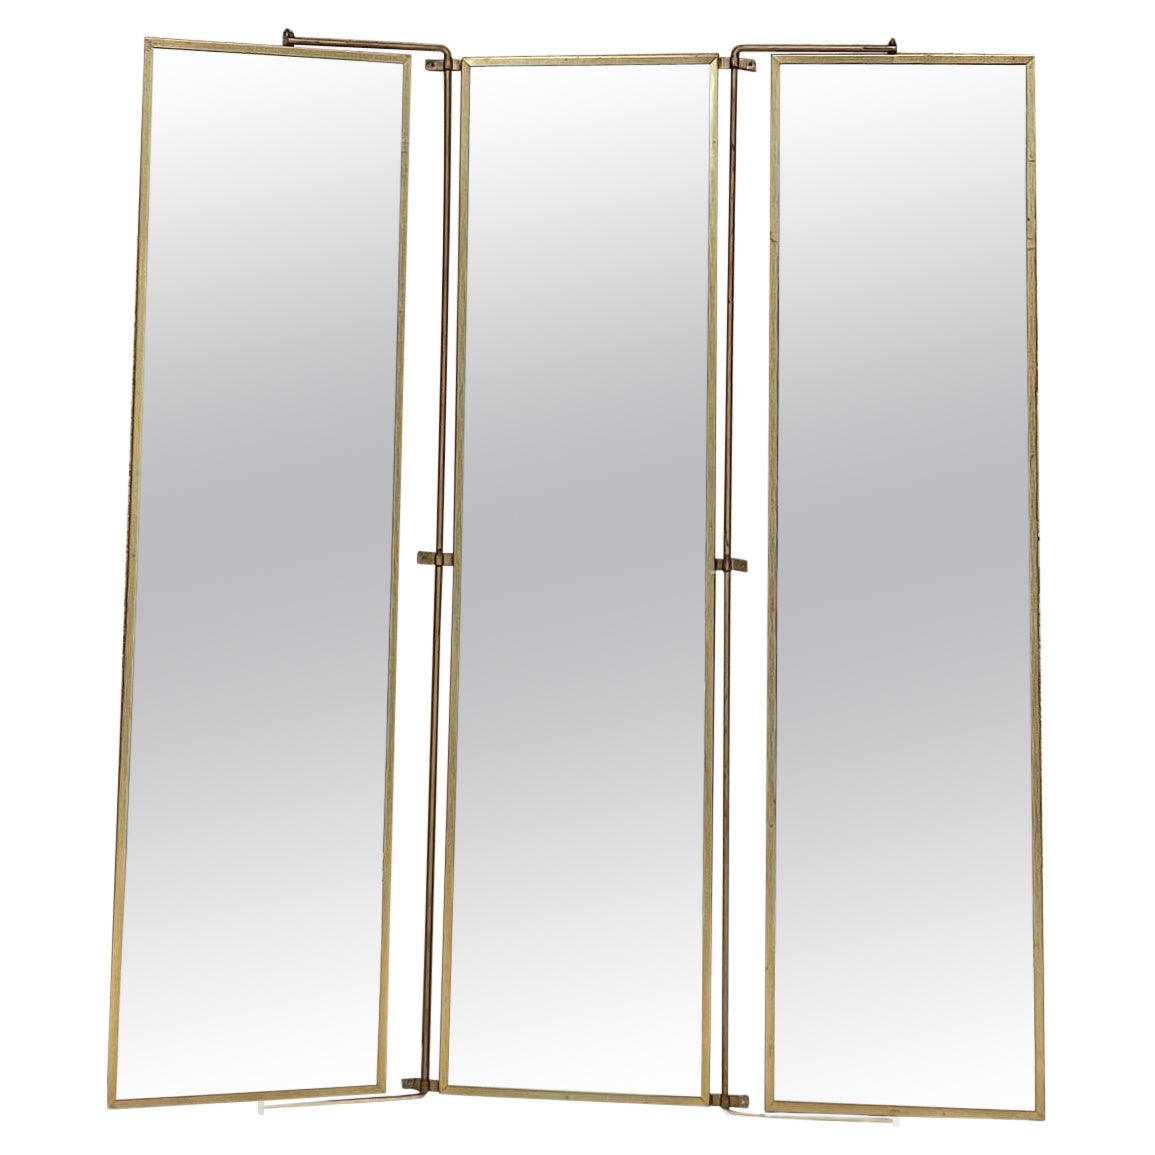  La Barge Modern Full Mirror Trifold Panel Screen Patinated Brass Frame 1960s